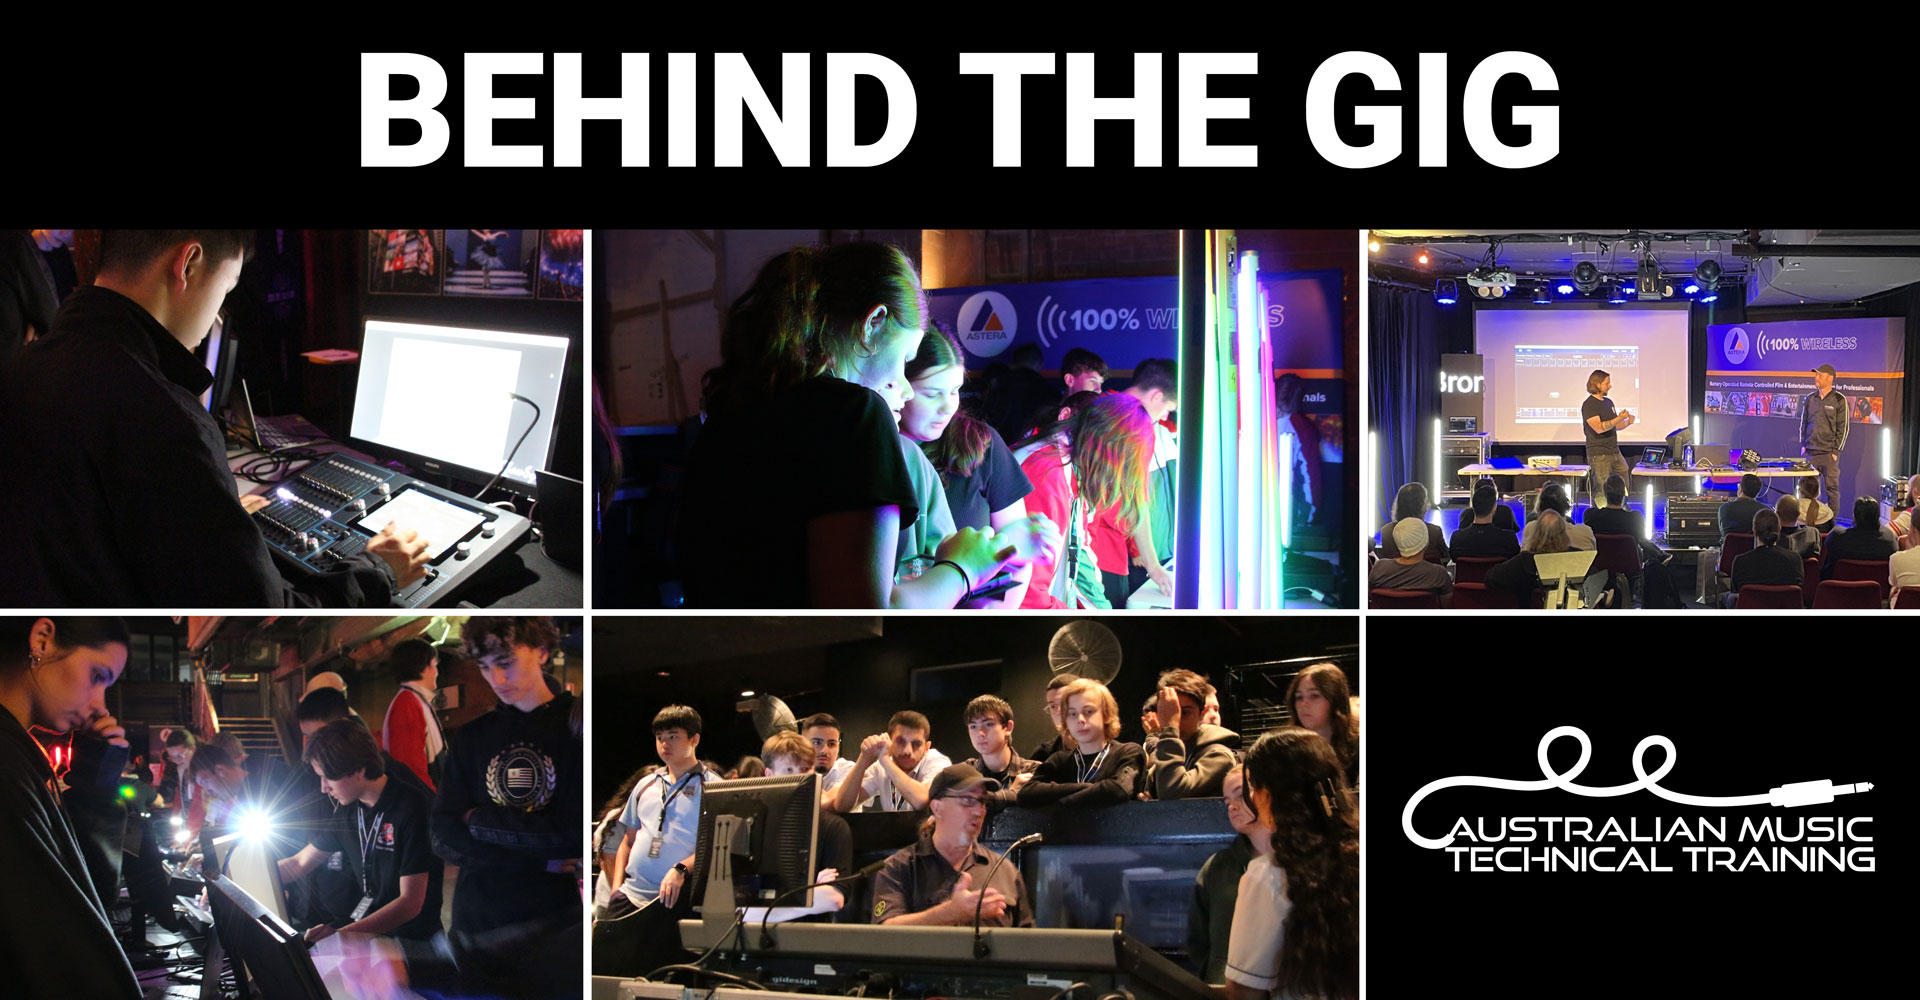 Behind the GIG - Image Collage